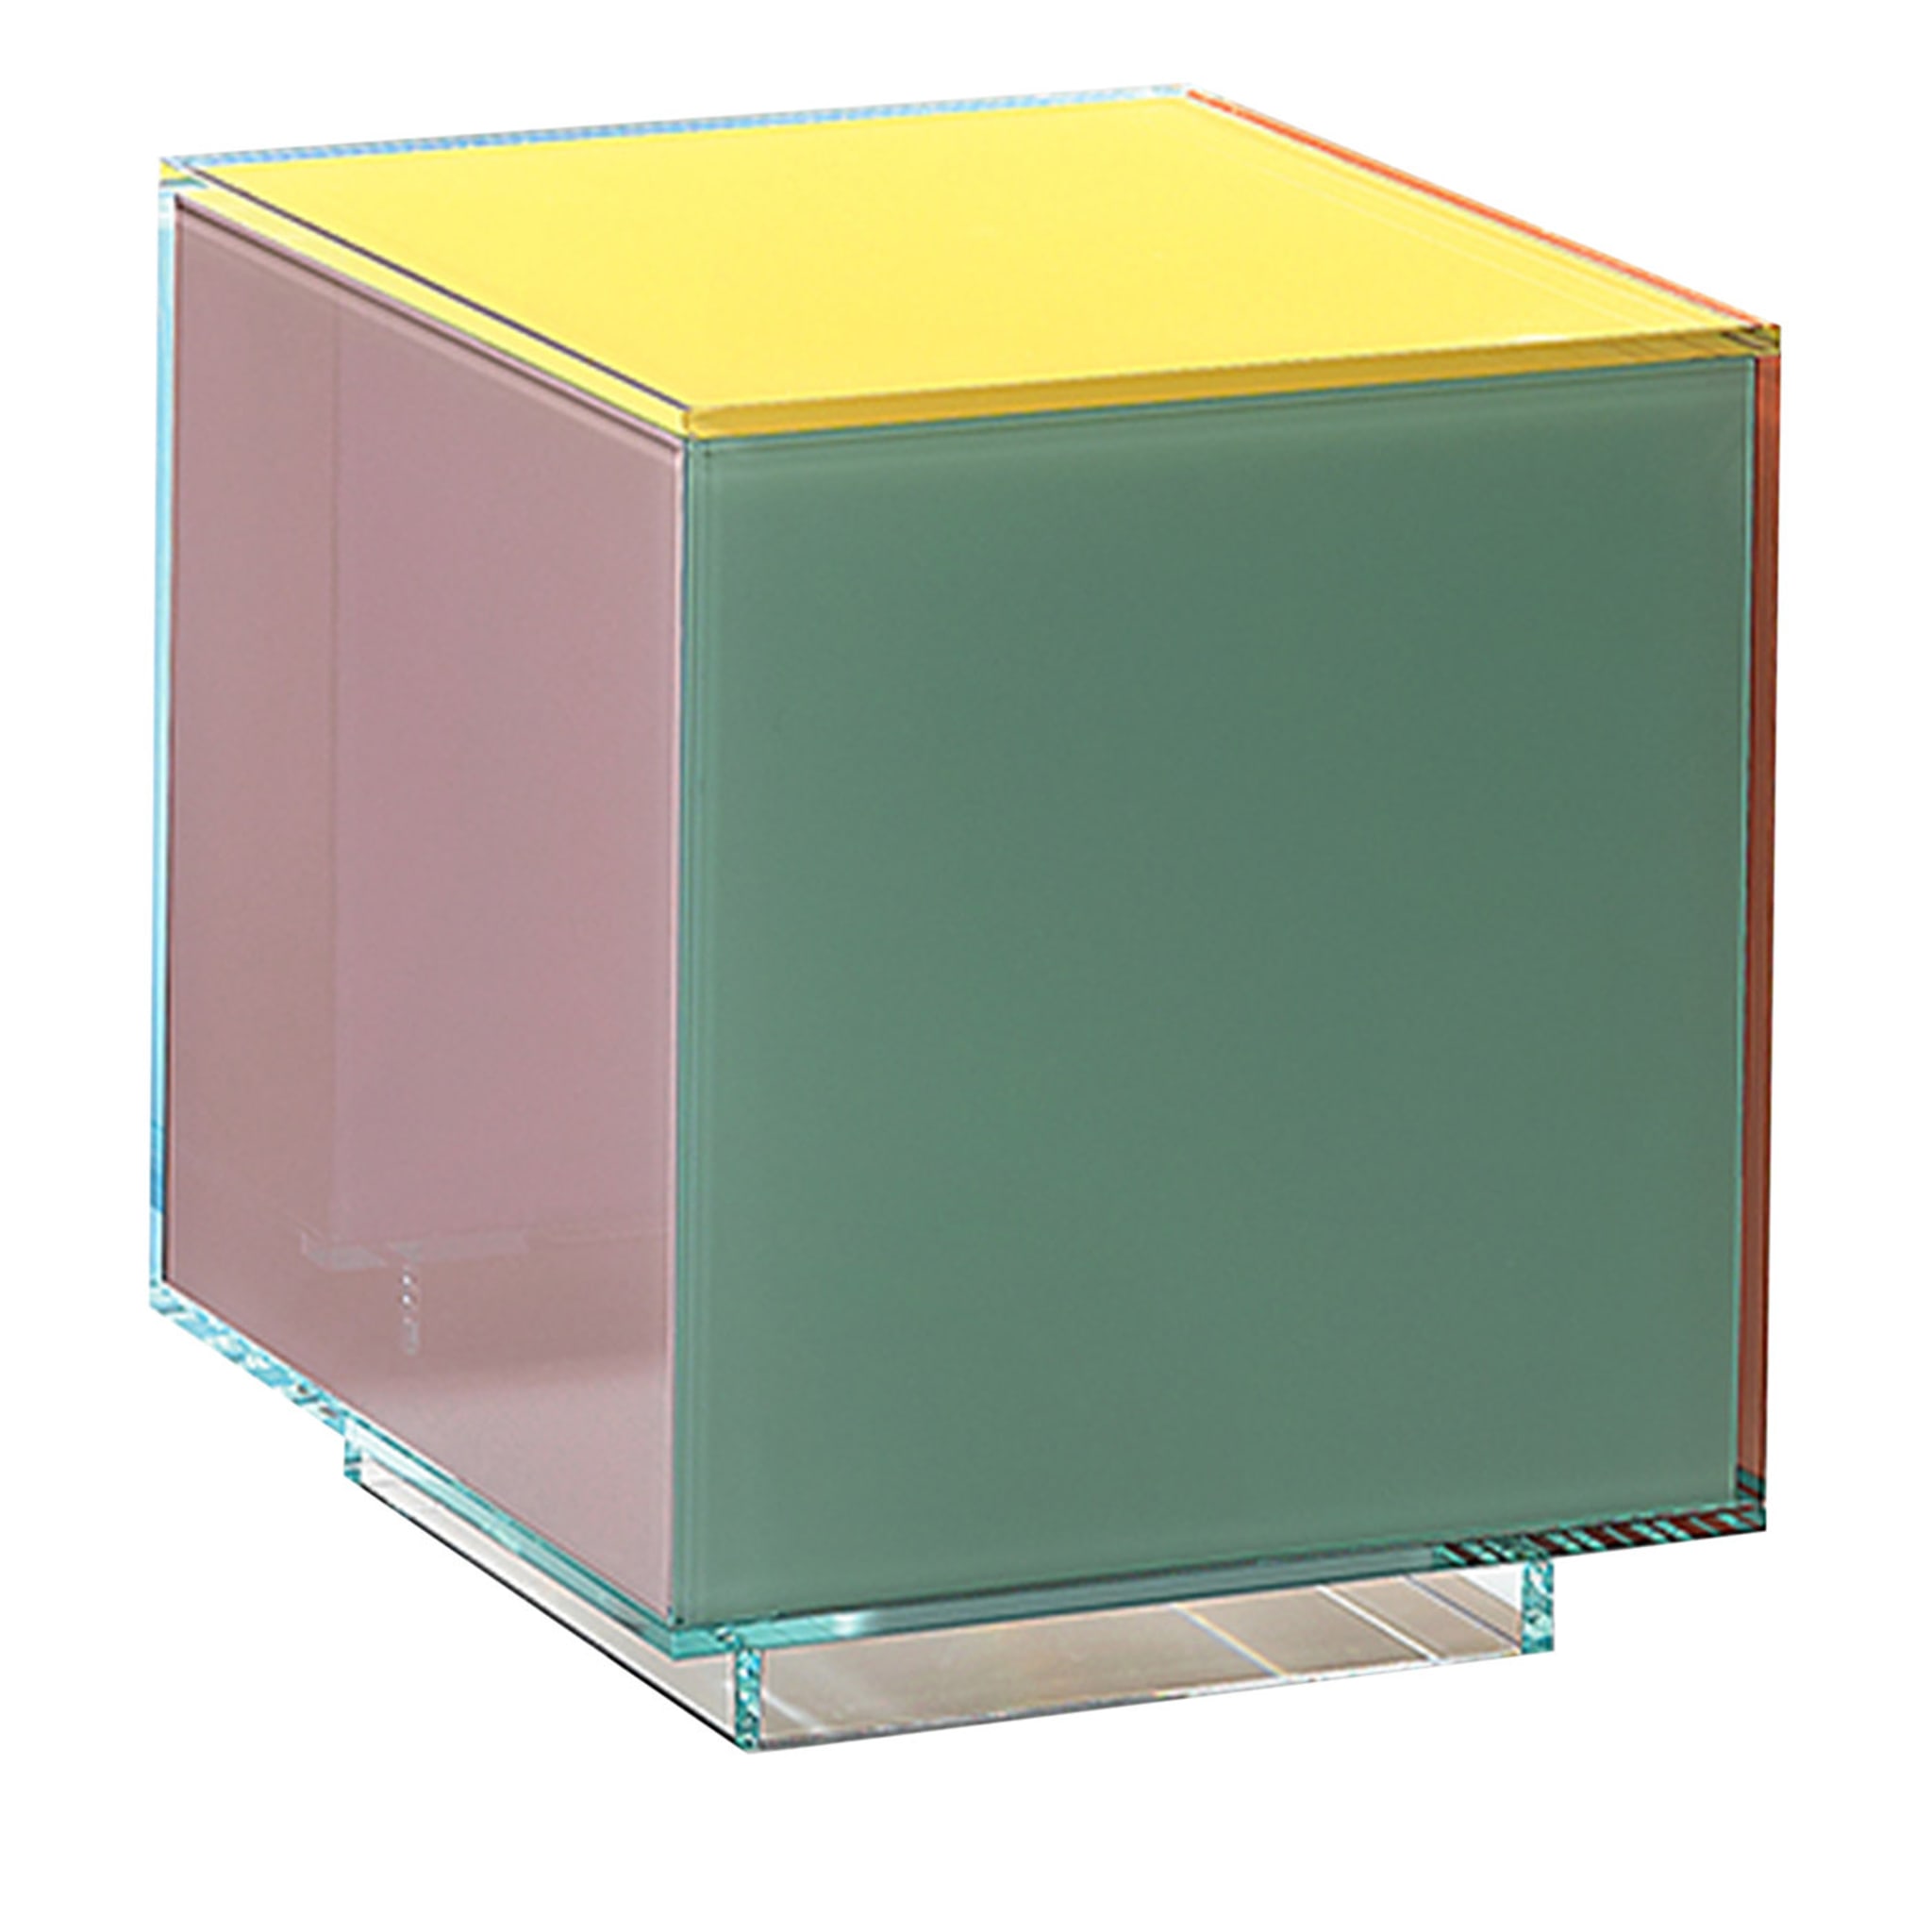 Cubicolor Small Side Table by Daniele Merini - Main view